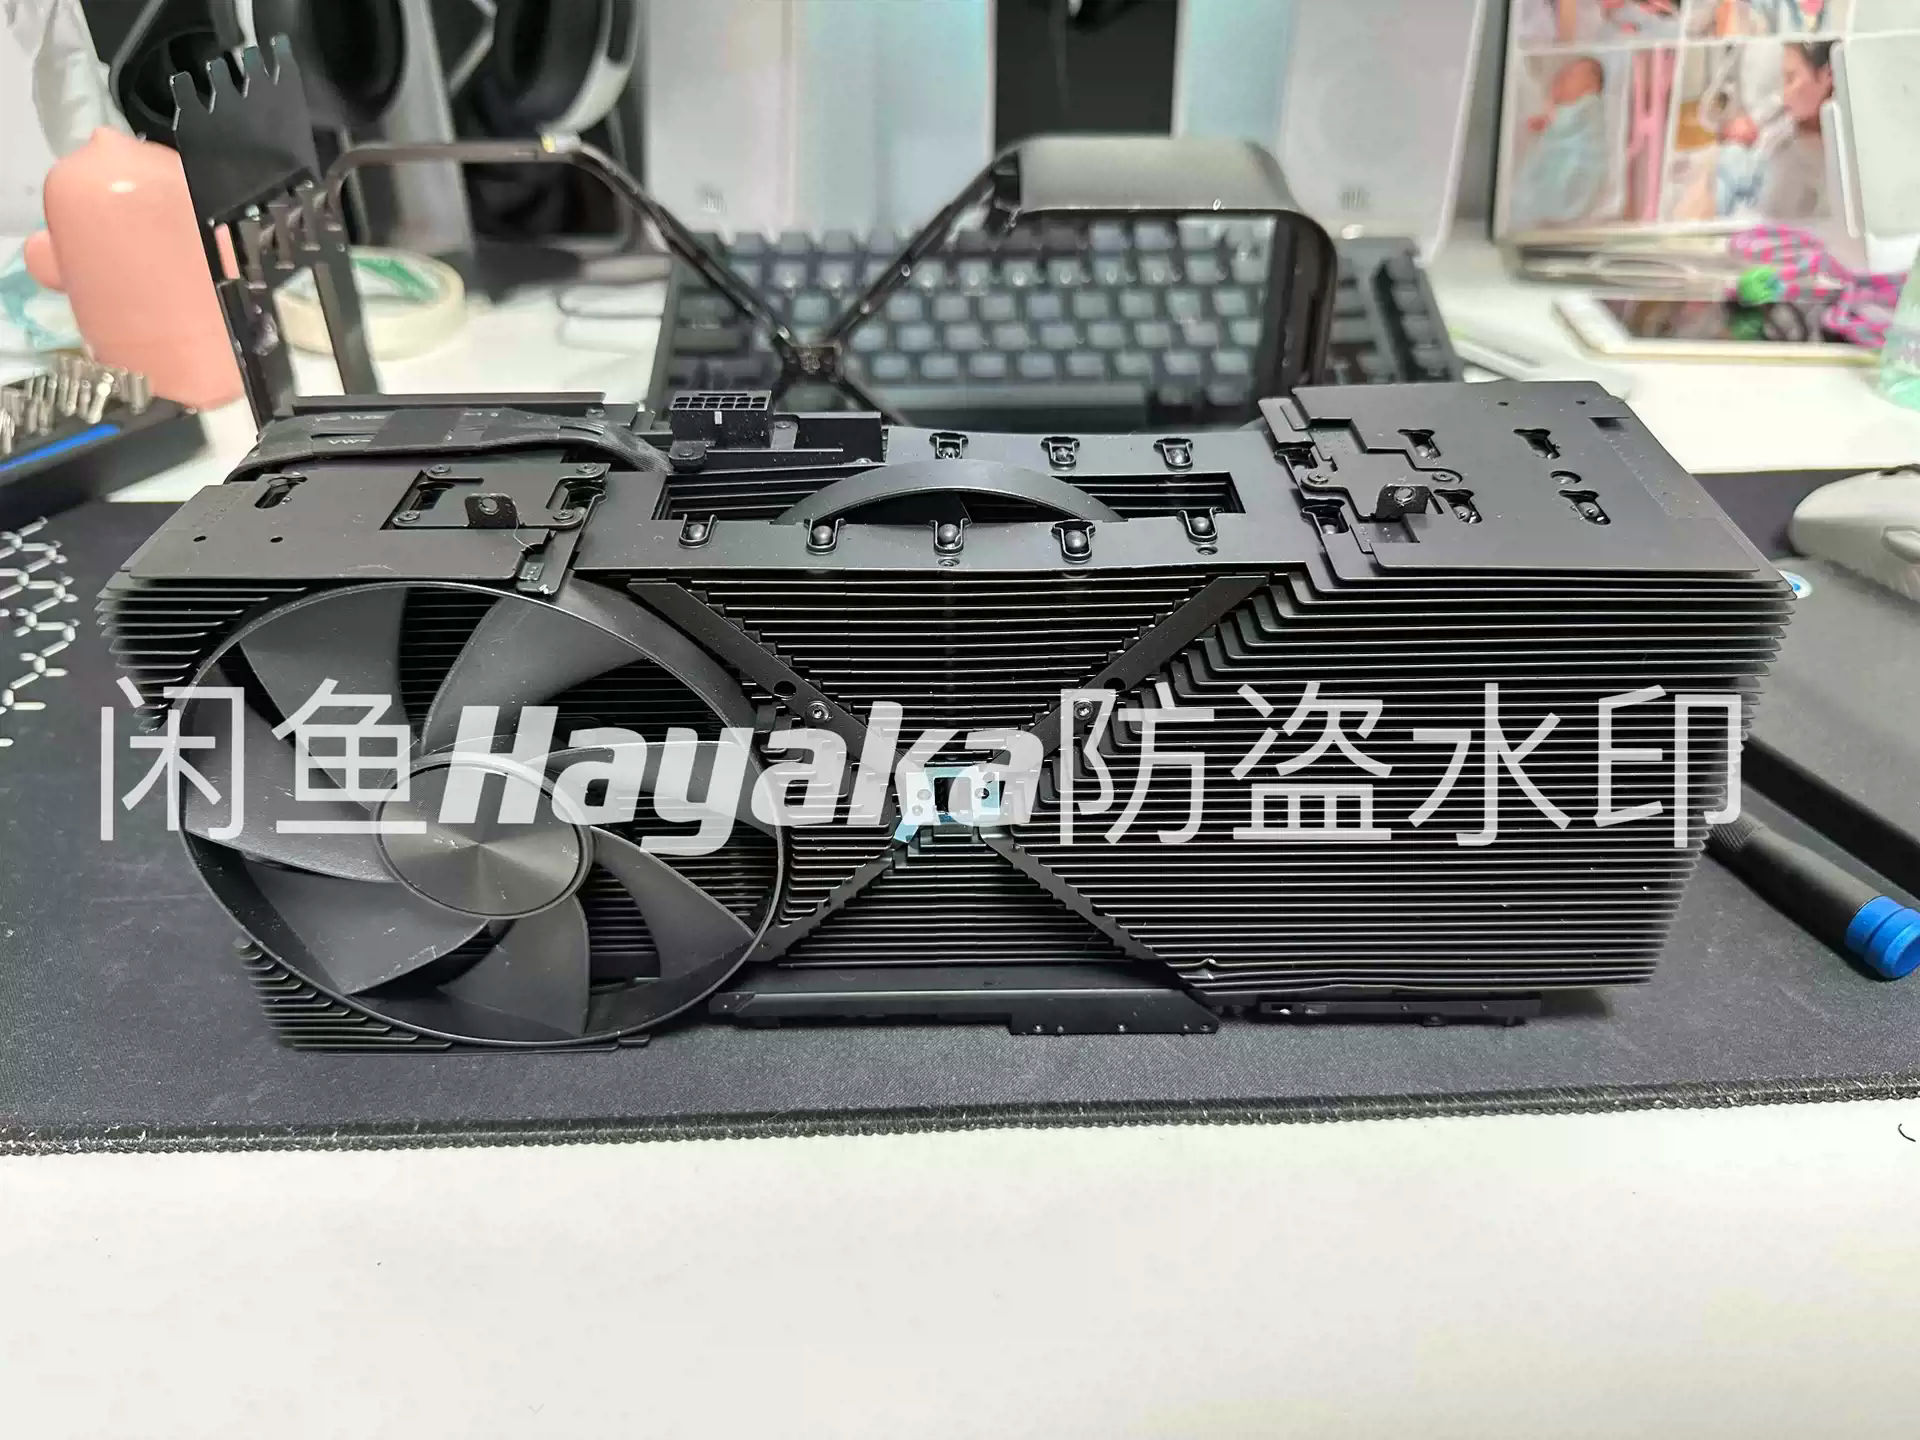 Alleged NVIDIA GeForce RTX 4090 Ti Founders Edition Graphics Card Cooler  Pictured: Massive Cooling Design With Huge Heatsink, Baseplate With Both  GPU & Memory Coverage